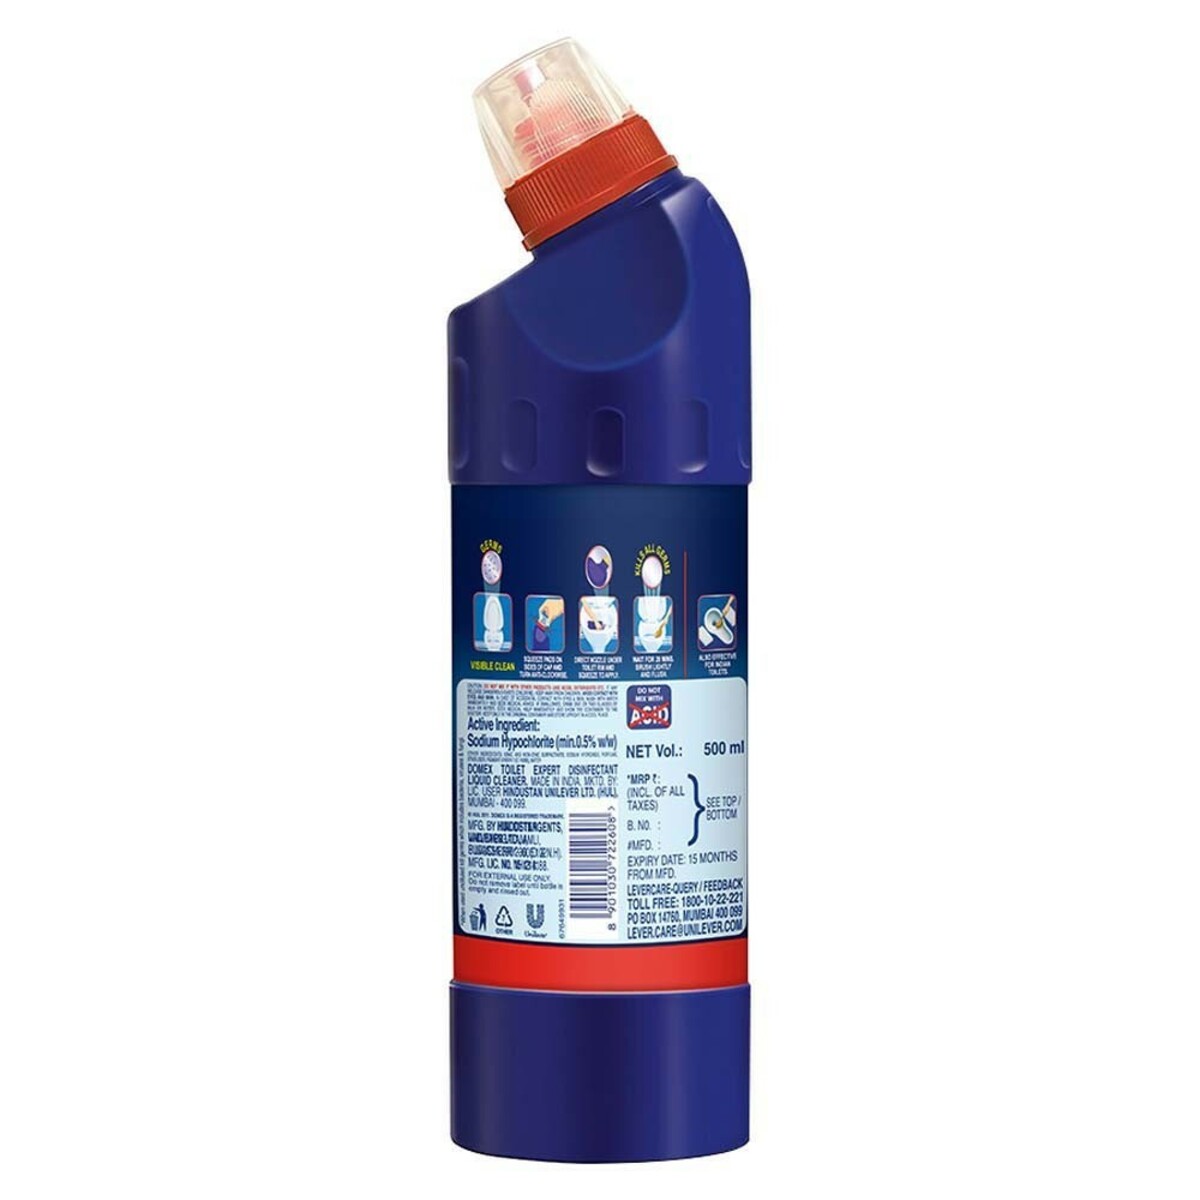 Domex Toilet Cleaner Blue 500ml